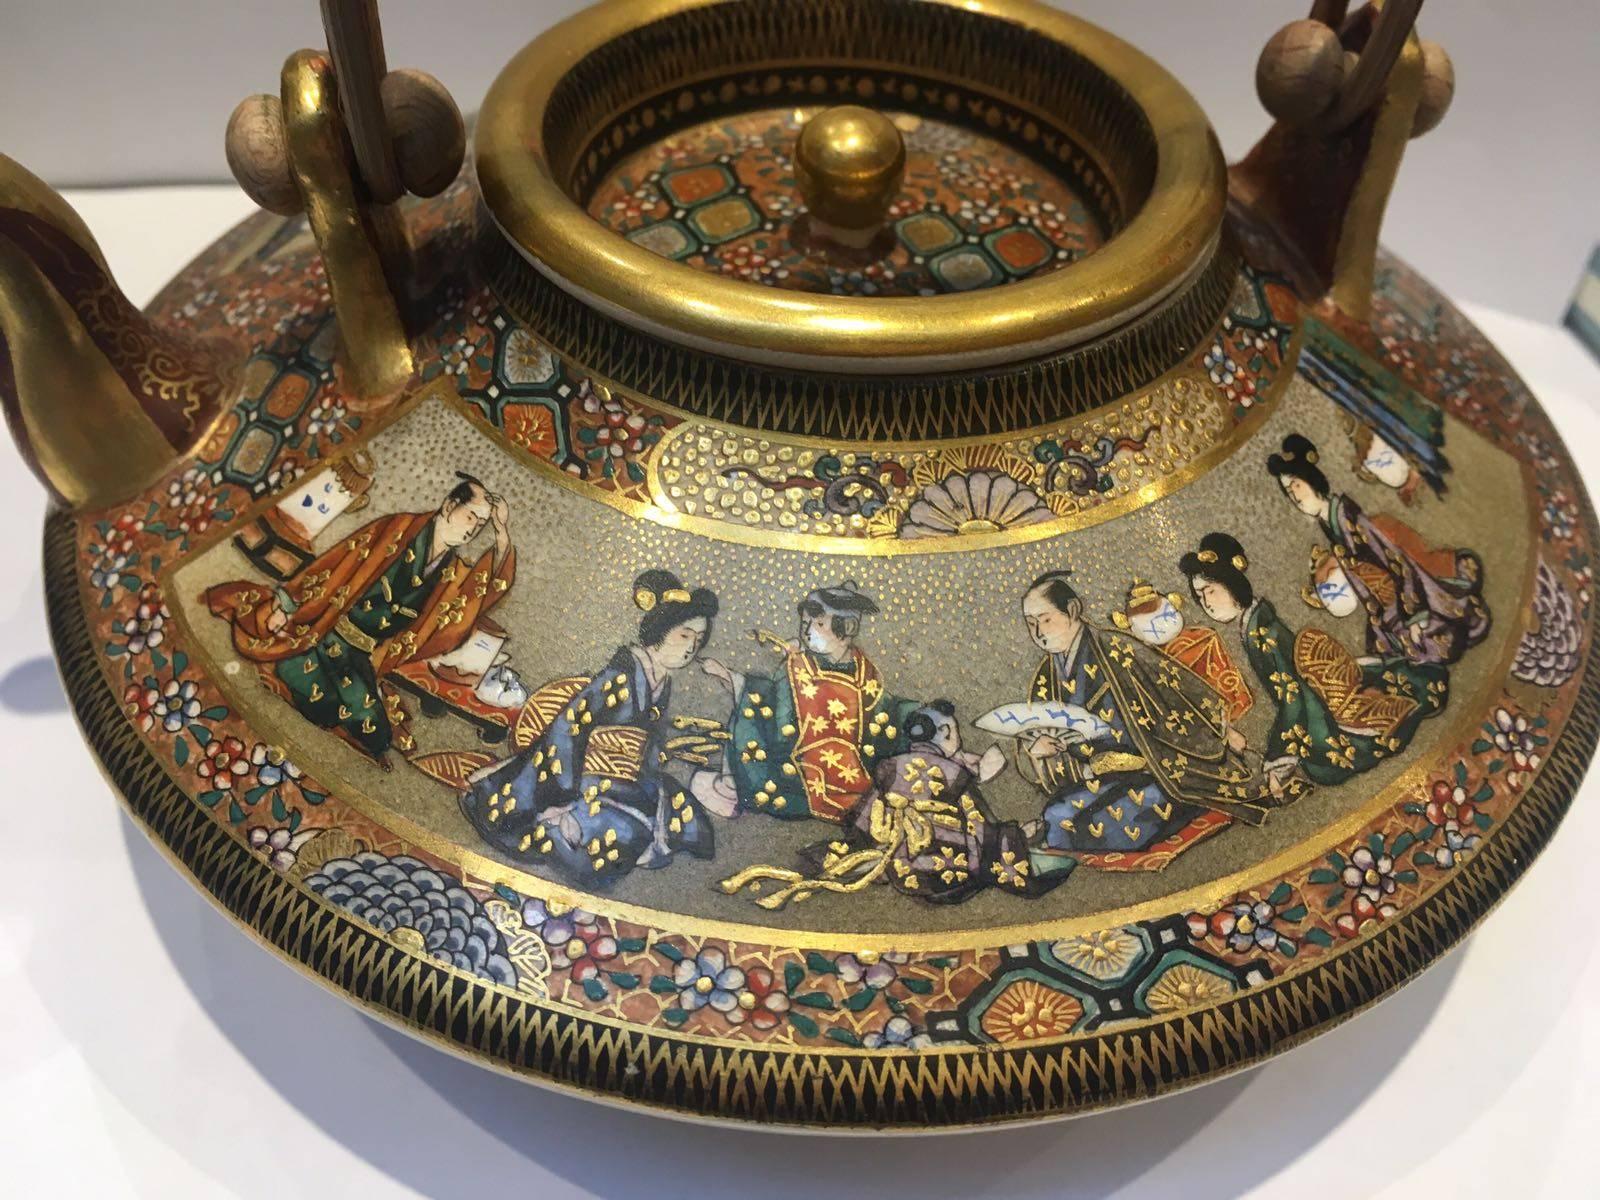 A Japanese Meiji Period Satsuma tripod sake pot with a bamboo handle. Intricately decorated, the pot features interiors scenes and various patterns filling in the porcelain flattened teapot shape. Gilt, the pot is further decorated with floral